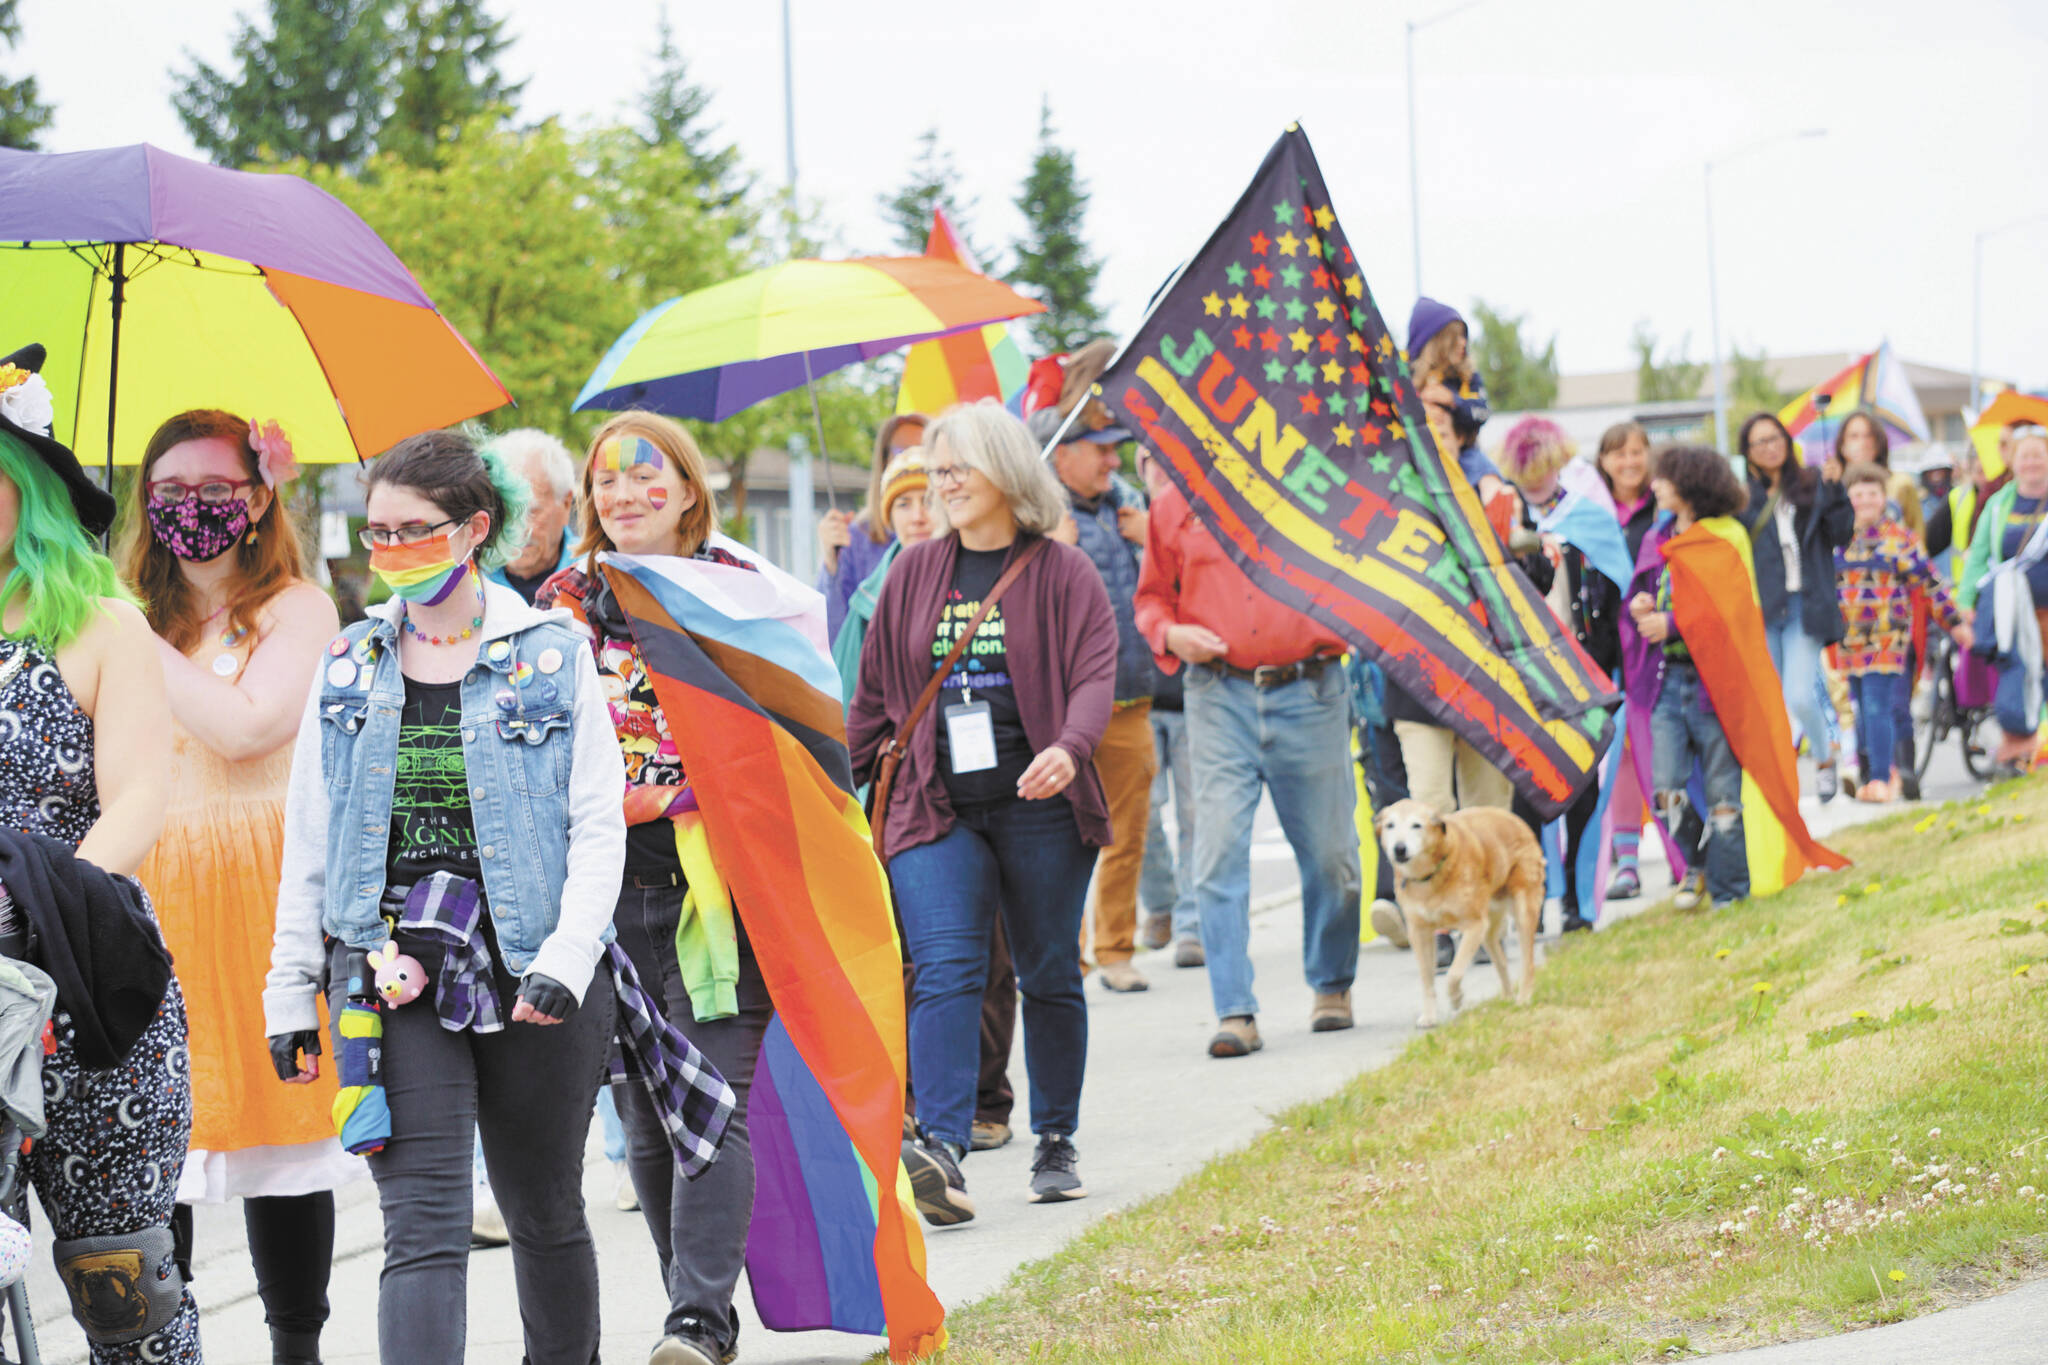 Marchers wearing Pride rainbow colors and carrying Juneteenth flags march in the Pride-X-Juneteenth parade on Saturday, June 18, on Pioneer Avenue. (Photo by Michael Armstrong/Homer News)